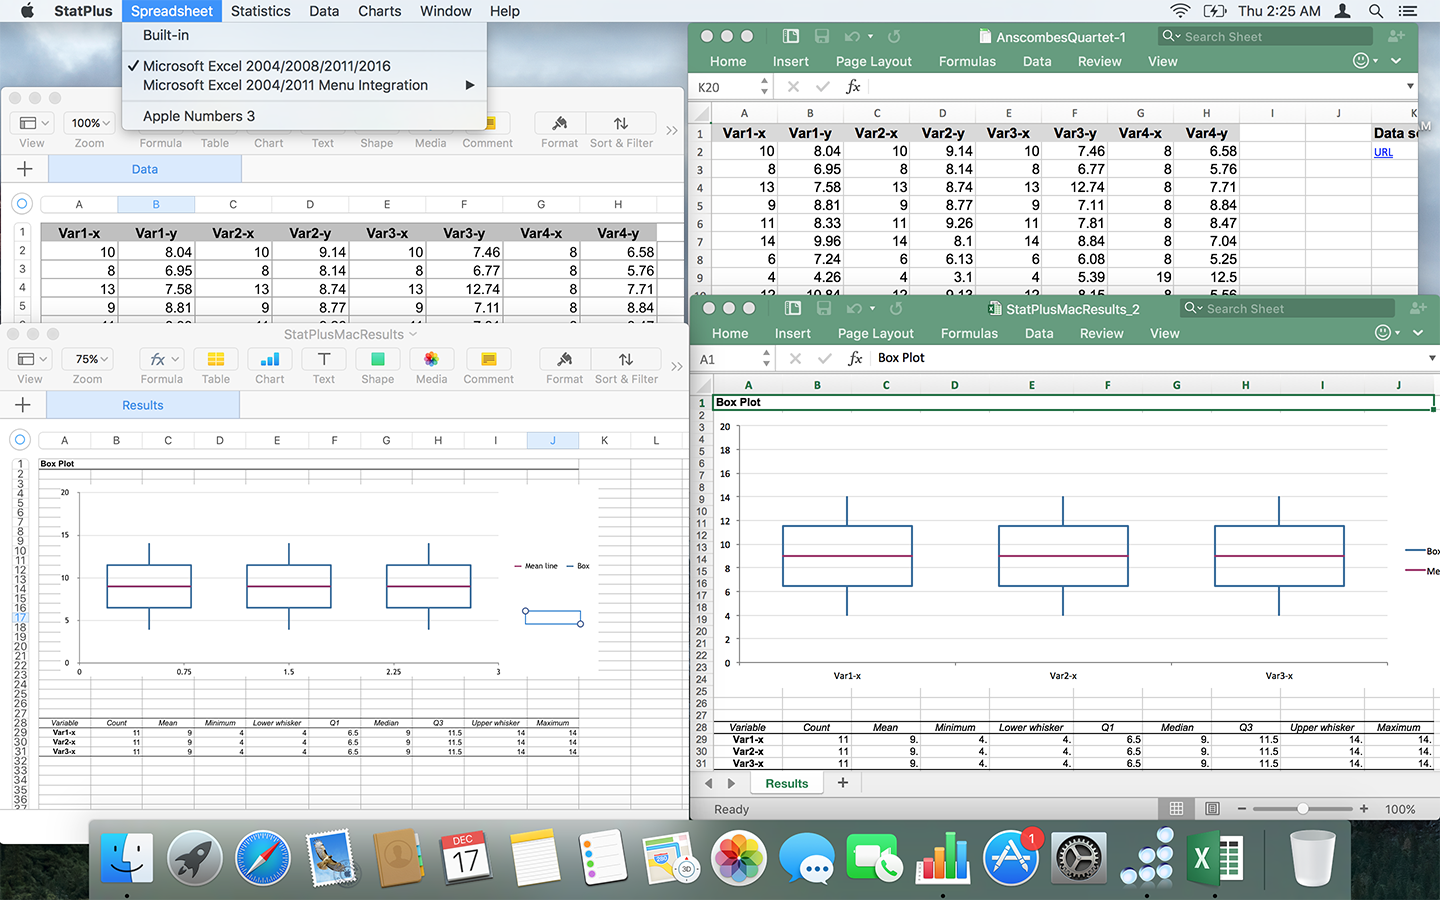 data analysis tool in excel 2013 free download